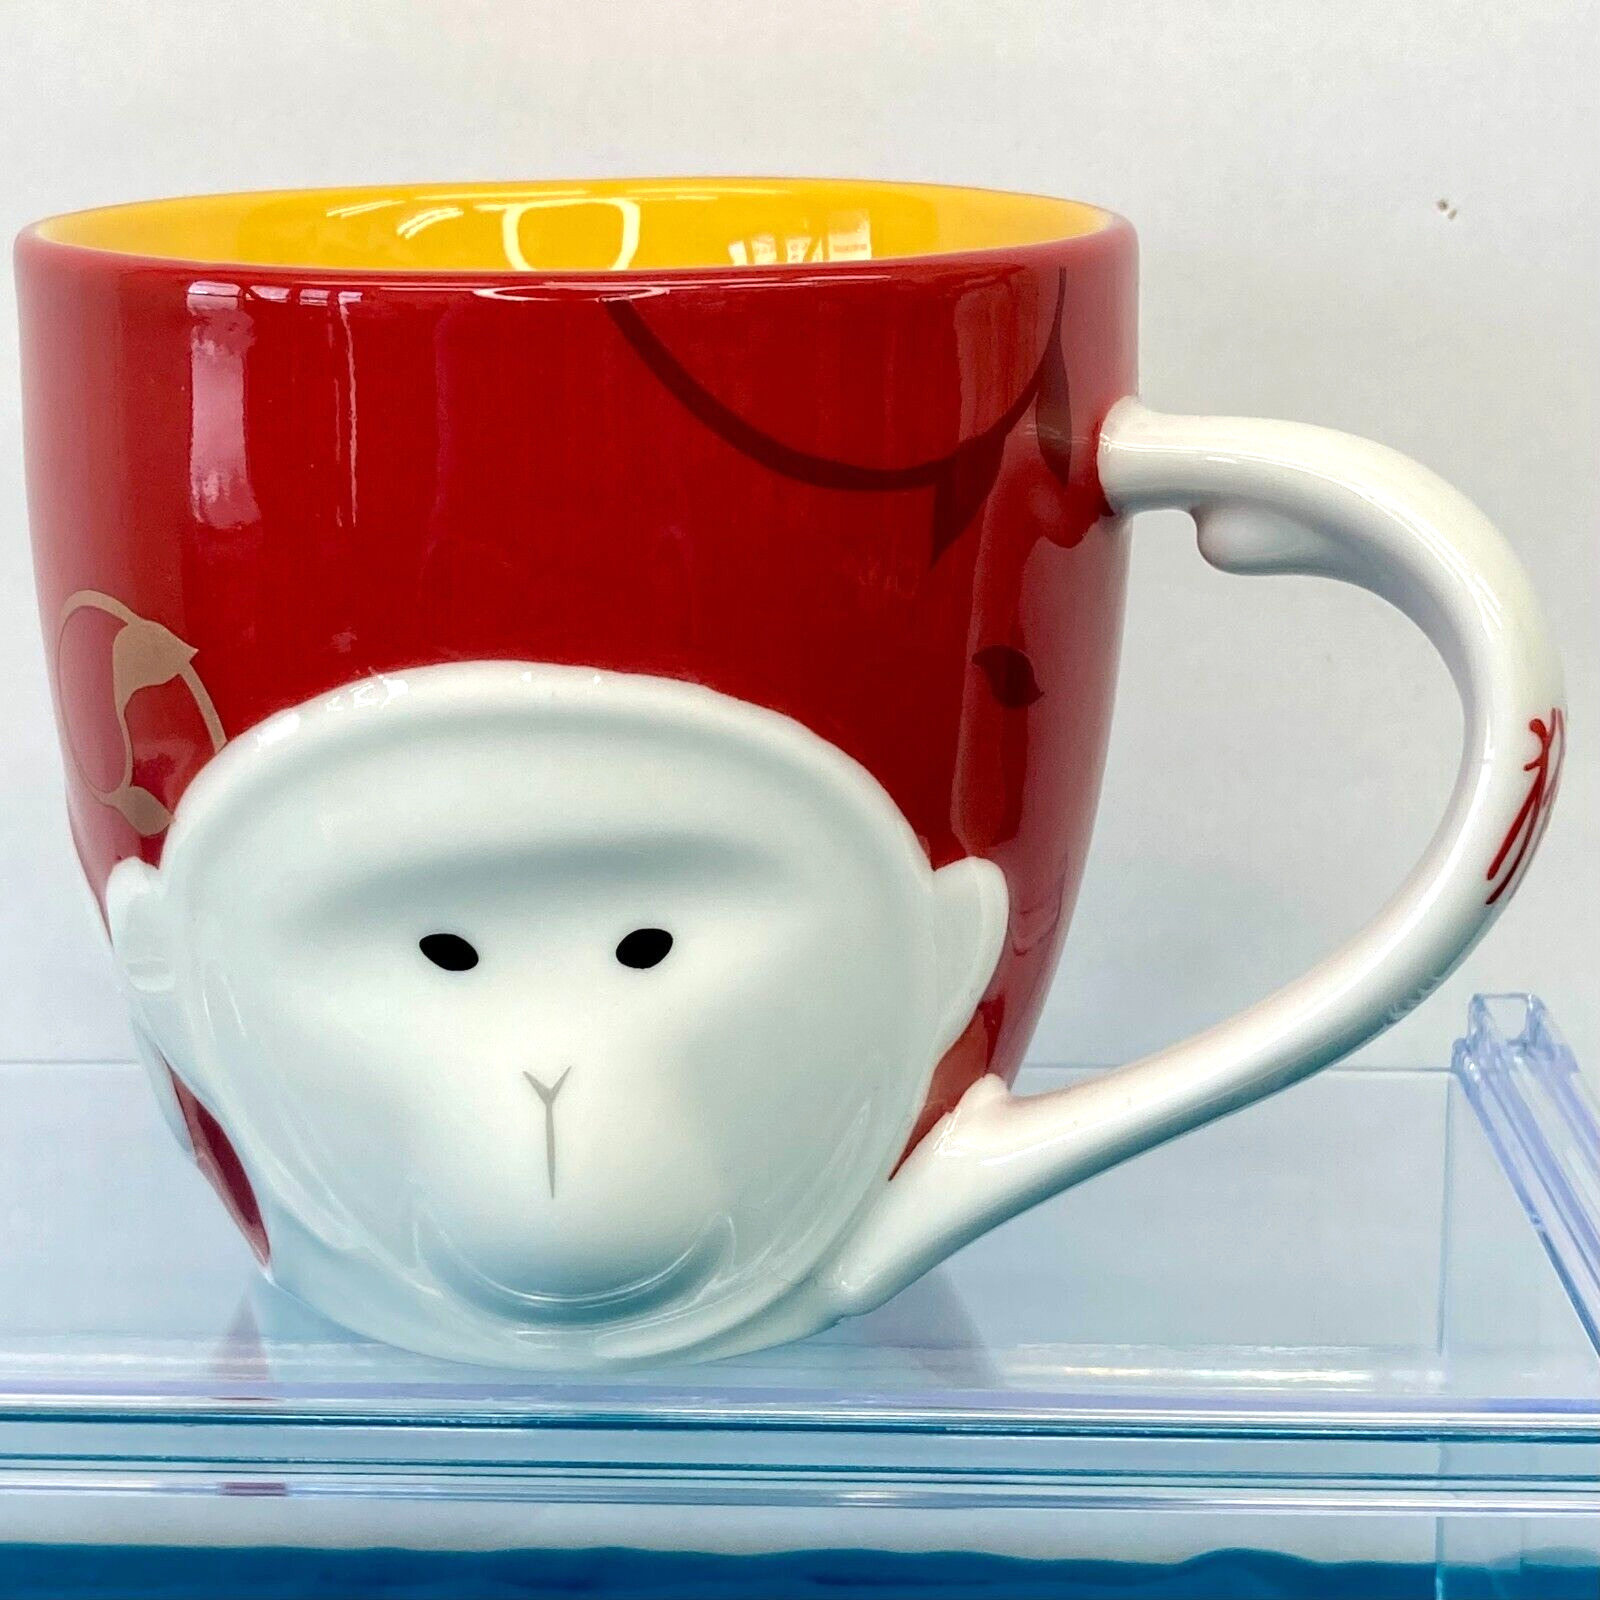 Japan Rare Limited Starbucks coffee 2016 Year of Monkey Mug Cup Pre-Owned Used